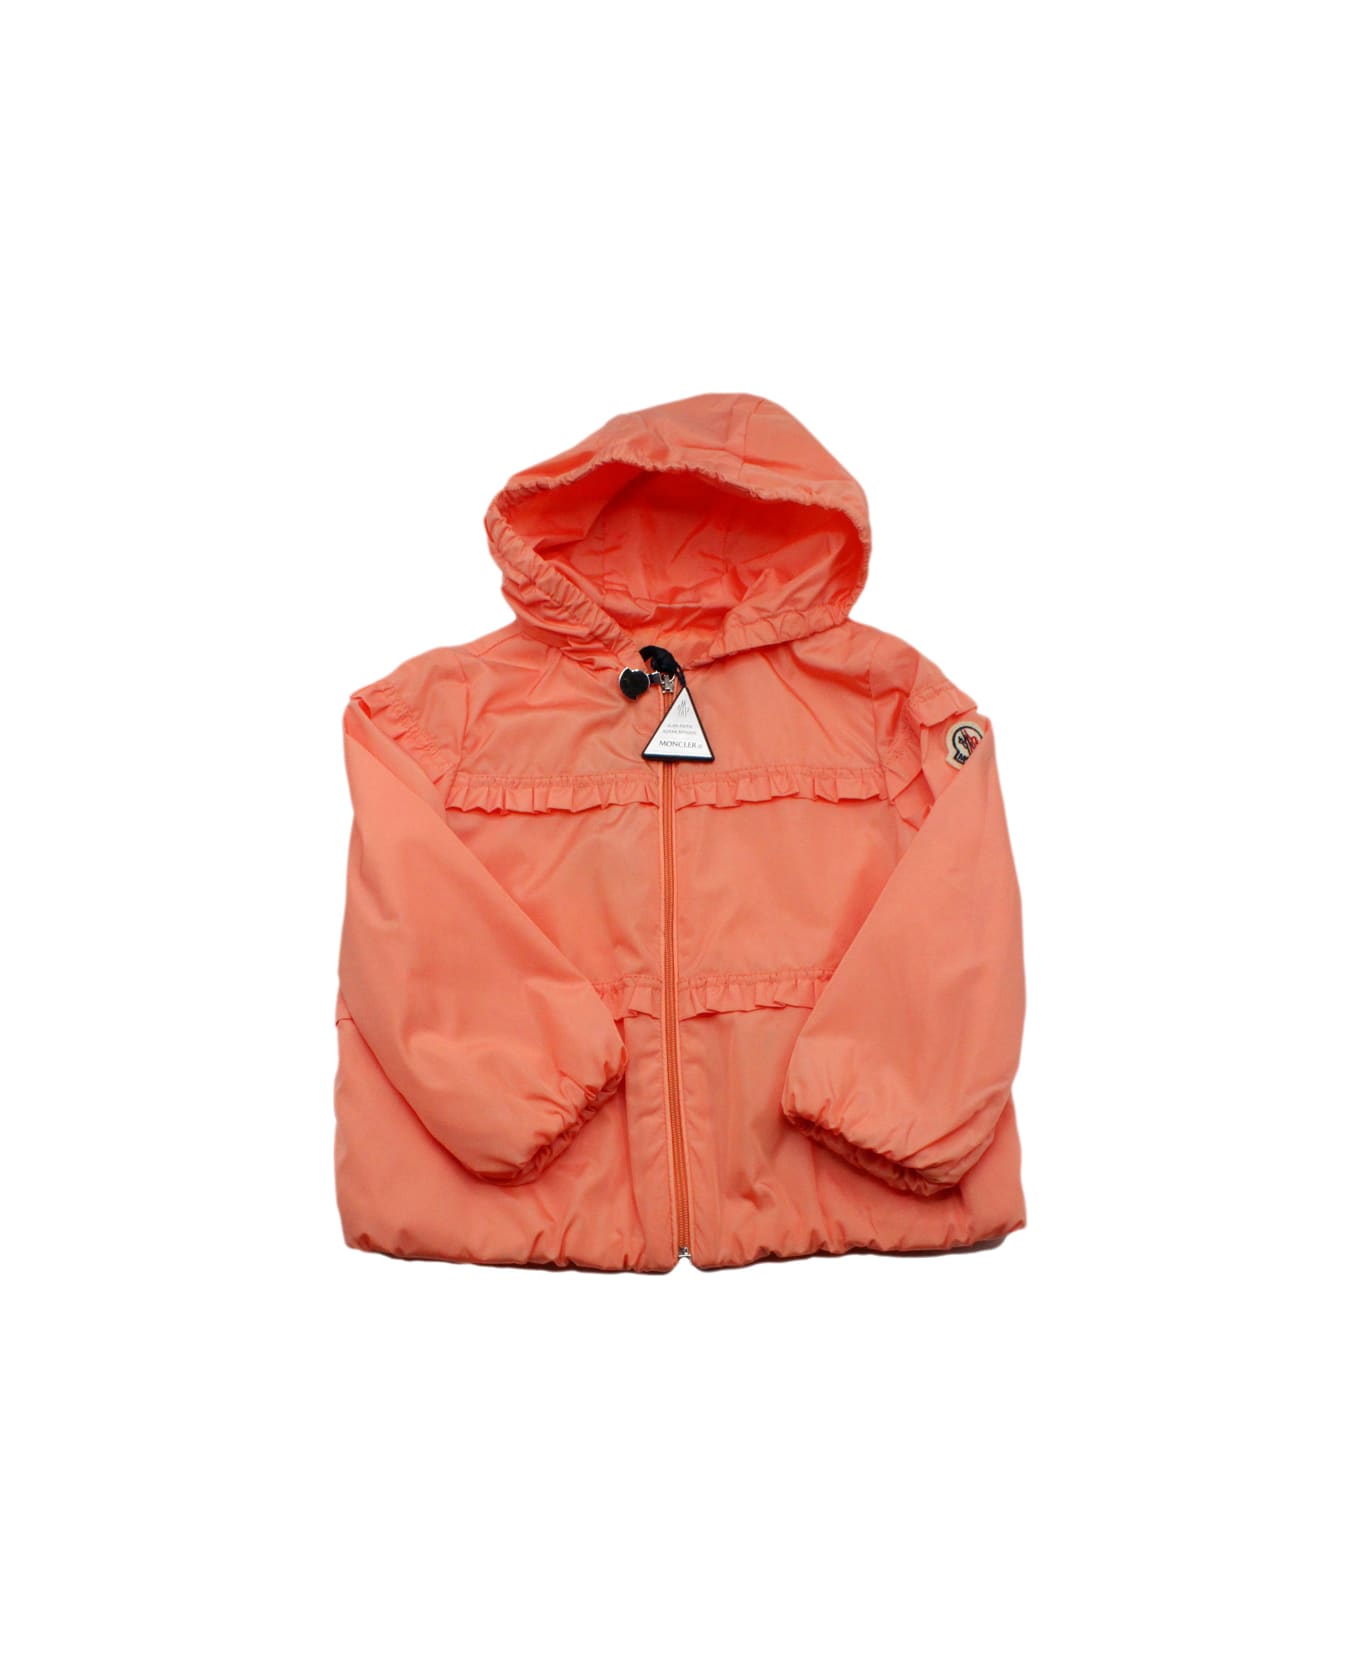 Moncler Hiti Jacket In Light Nylon With Hood, Embellished With Ruffles And Zip Closure. - Orange